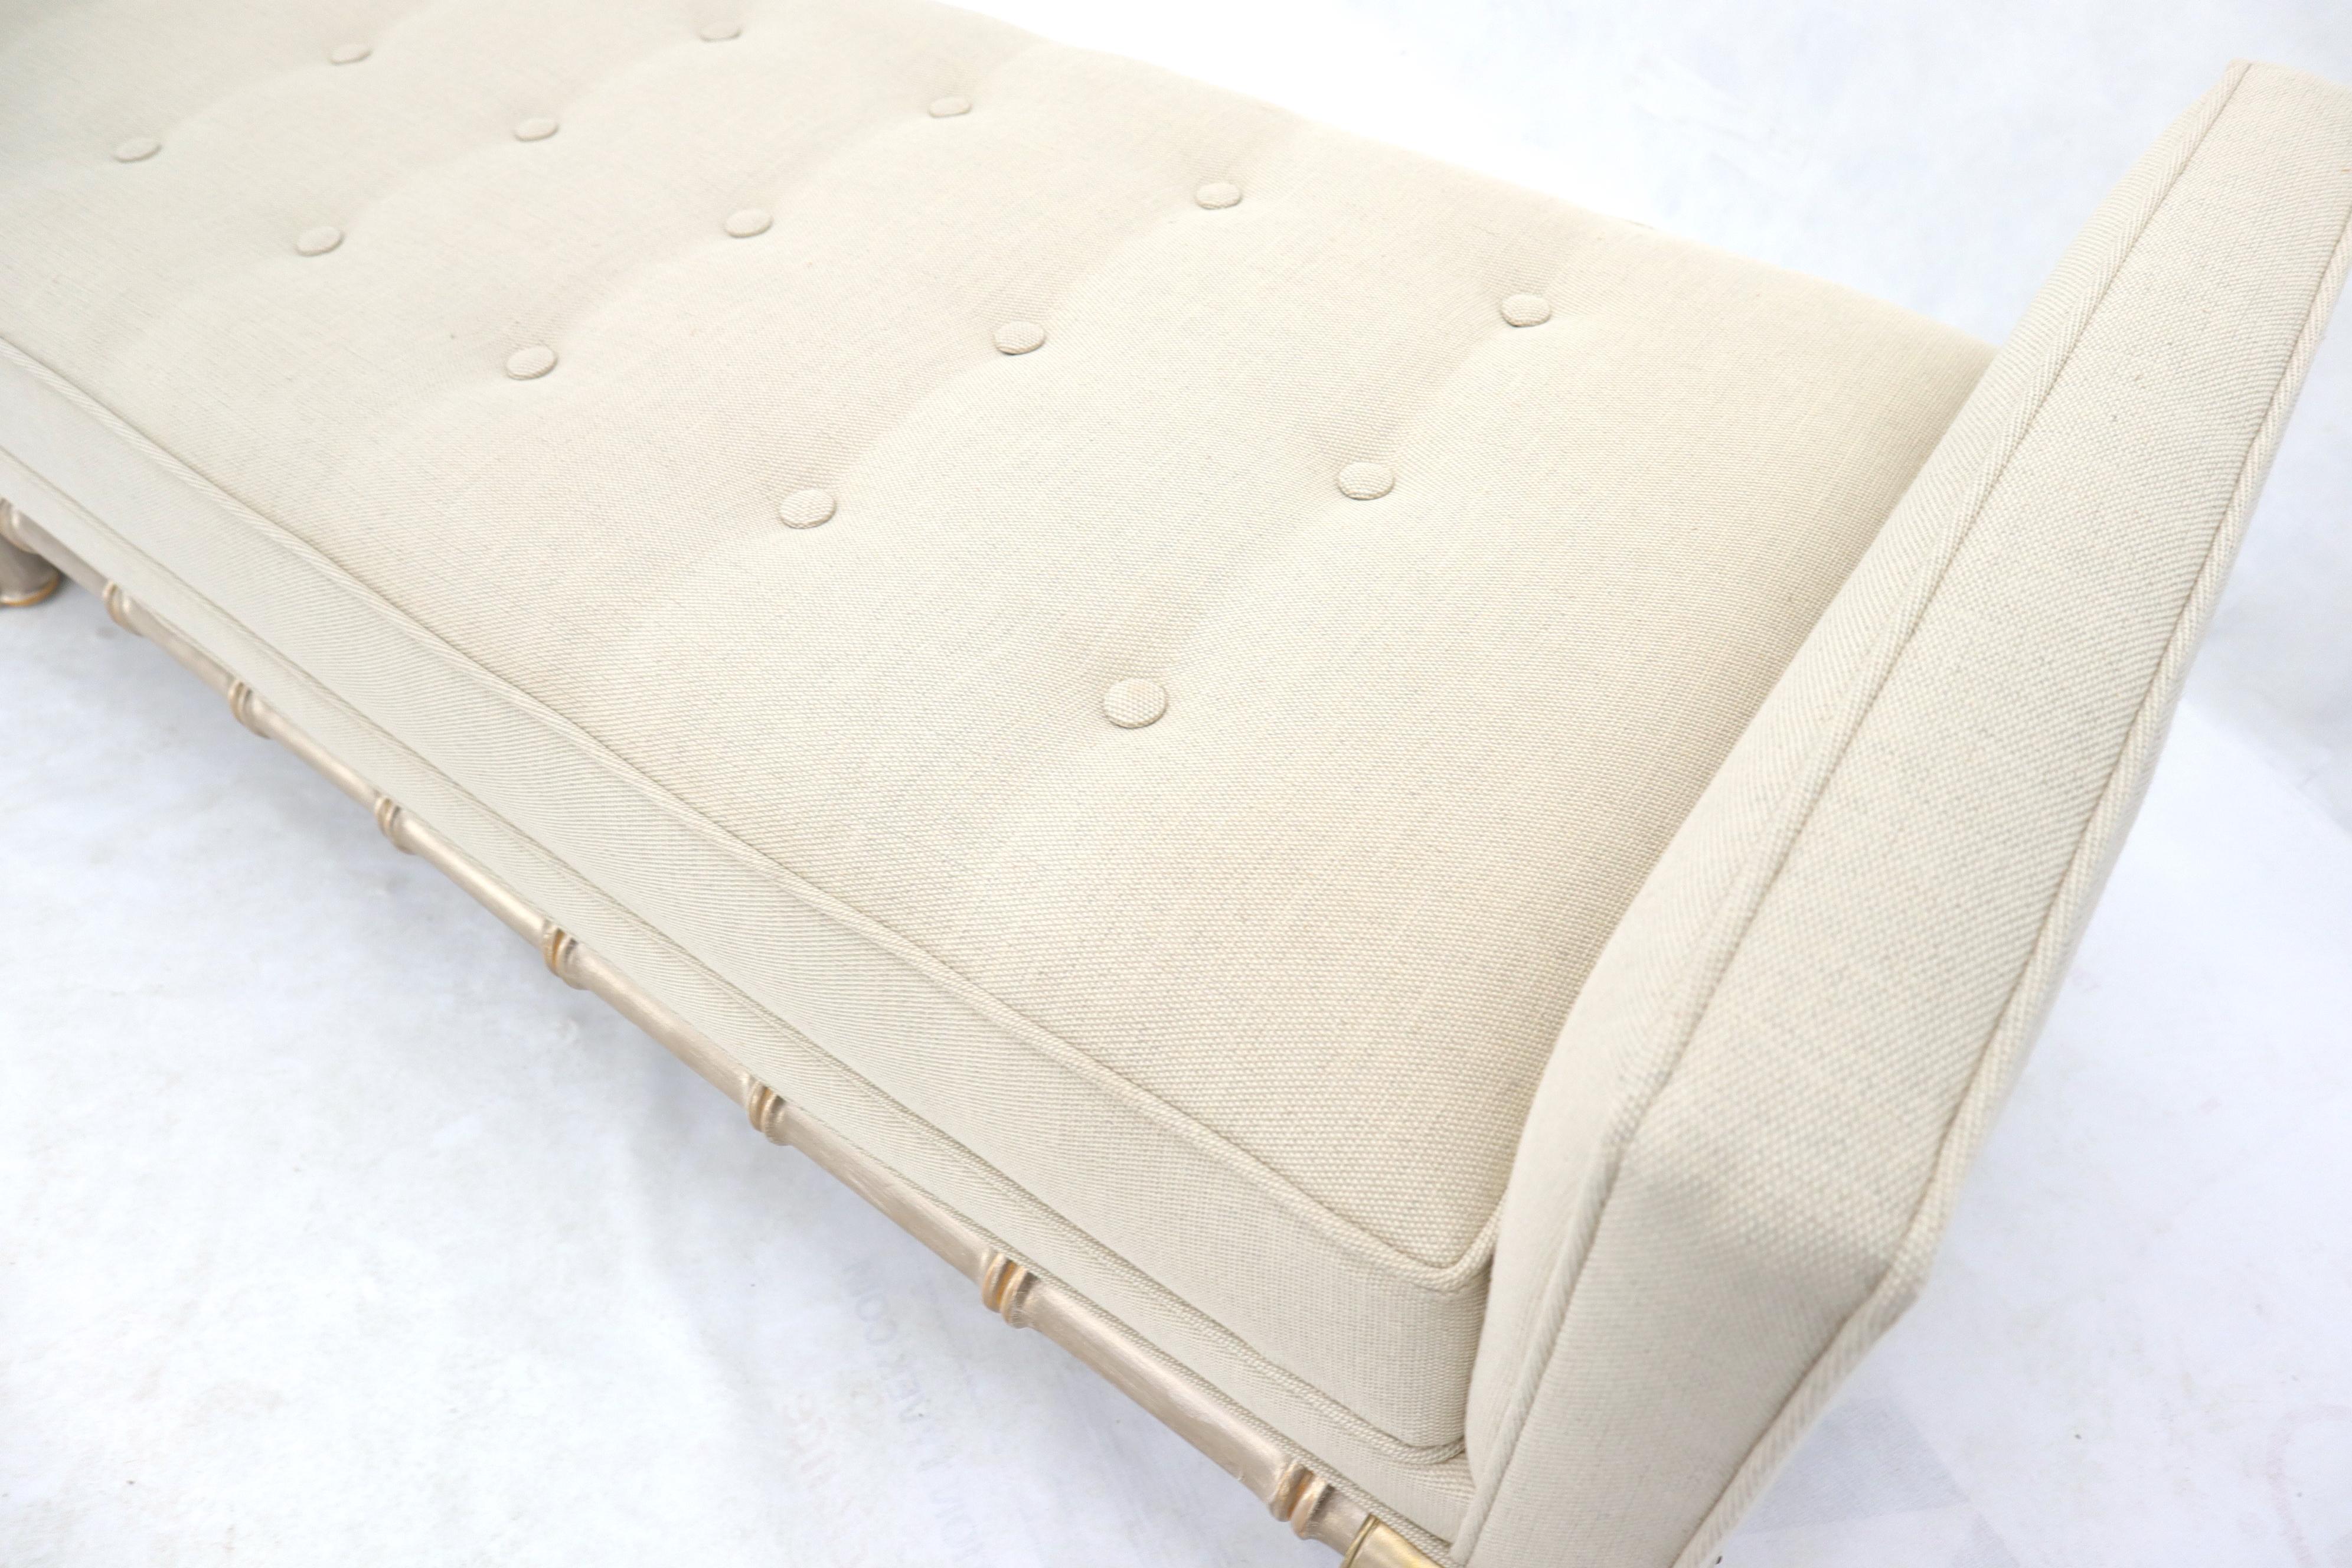 Faux Bamboo Base Tufted Upholstery Bench with Sides In Excellent Condition For Sale In Rockaway, NJ